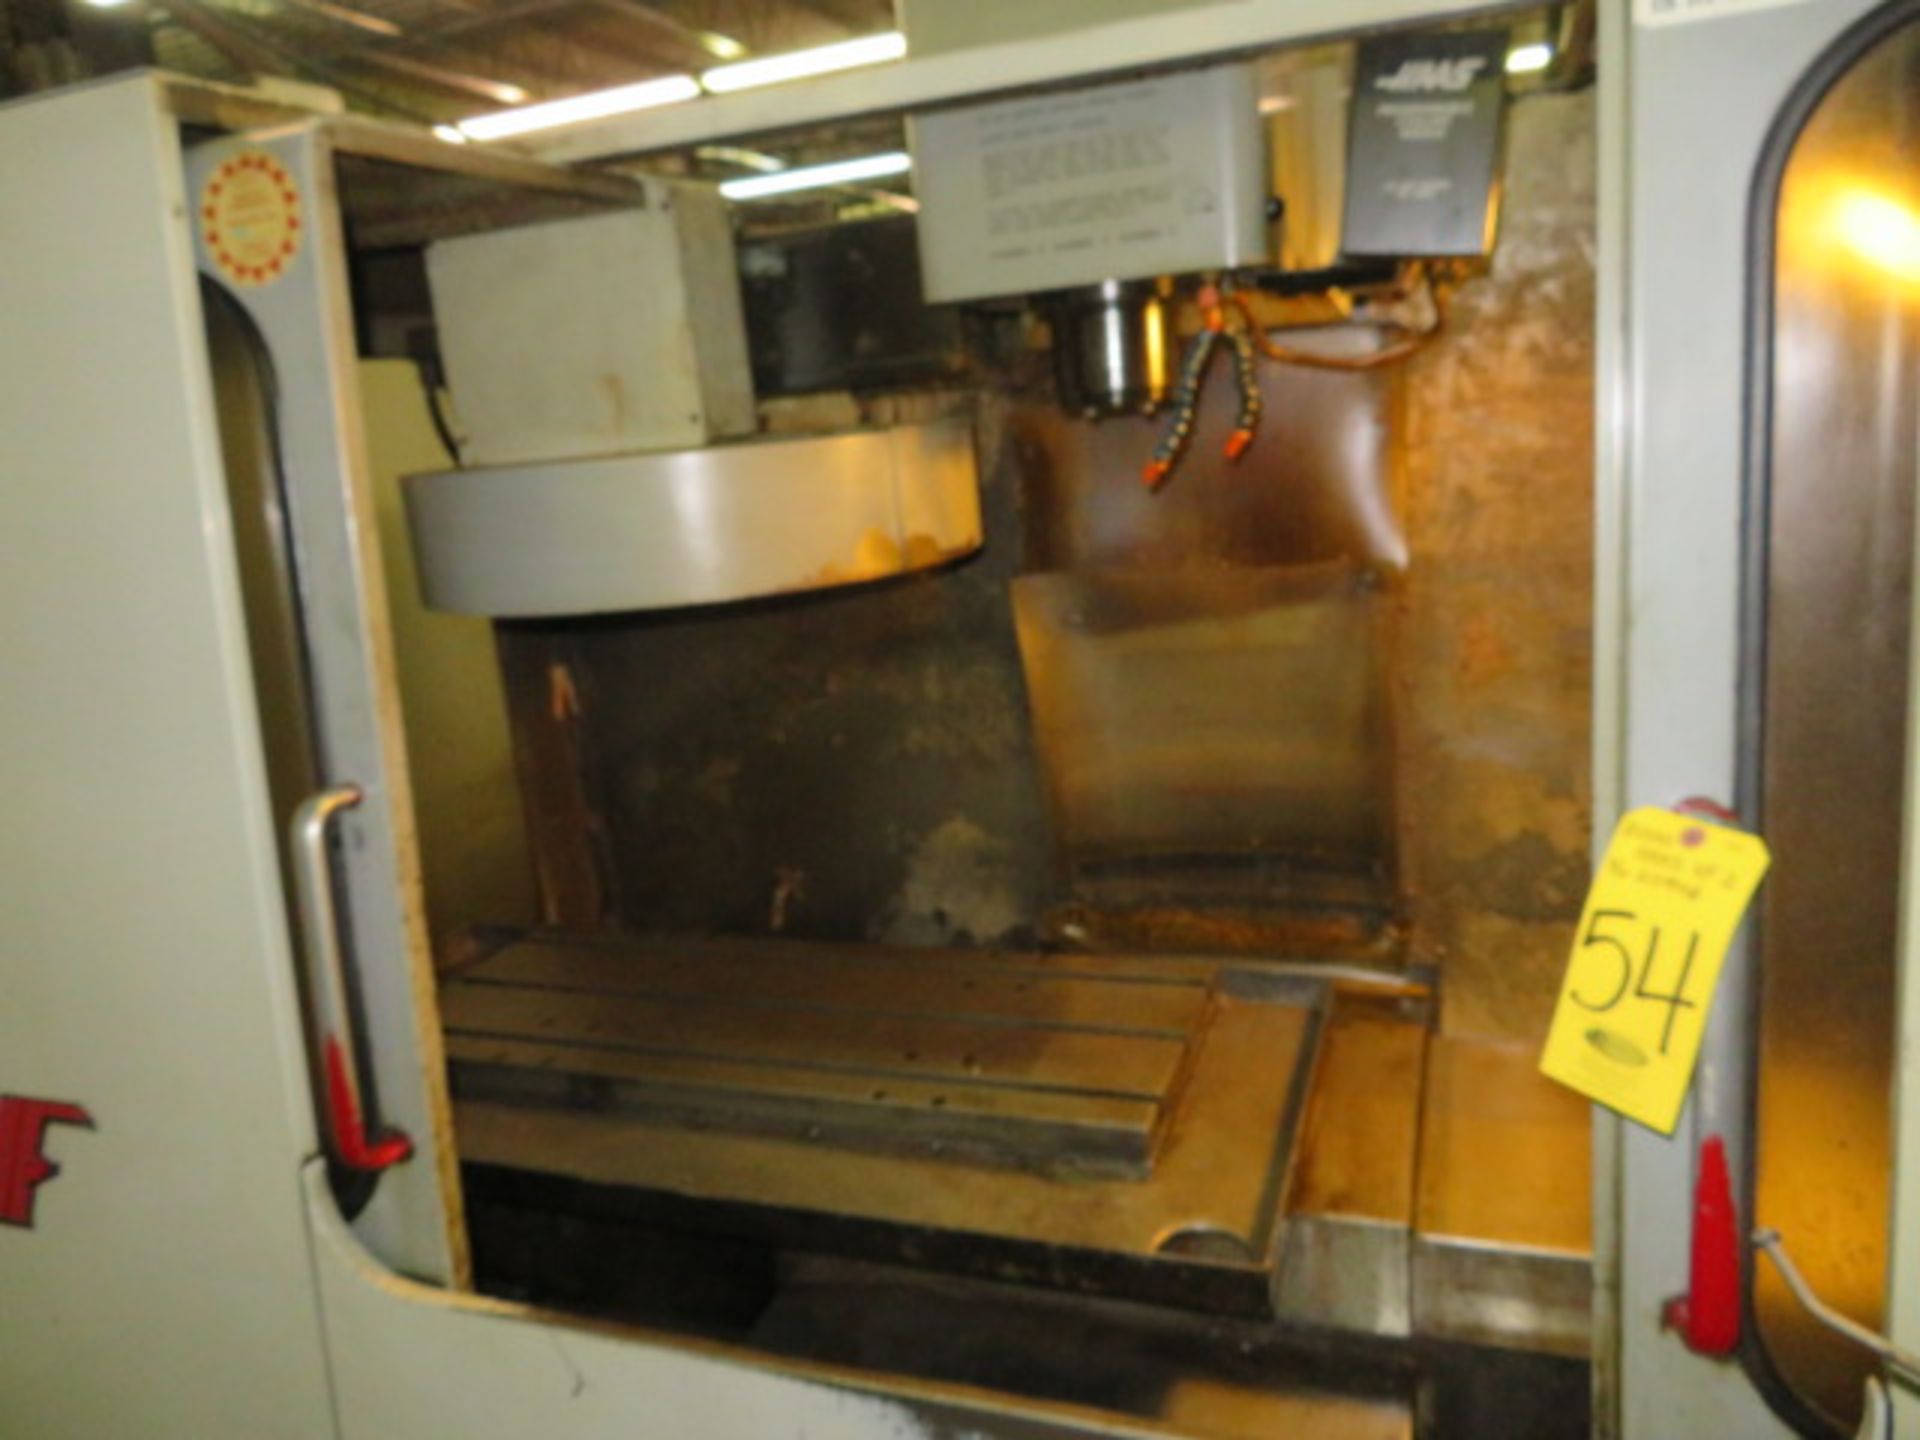 2000 HAAS VF-2 CNC Vertical Machining Center, S/N 20946, HAAS CNC Control, 4TH AXIS ENABLED W DRIVE - Image 3 of 5